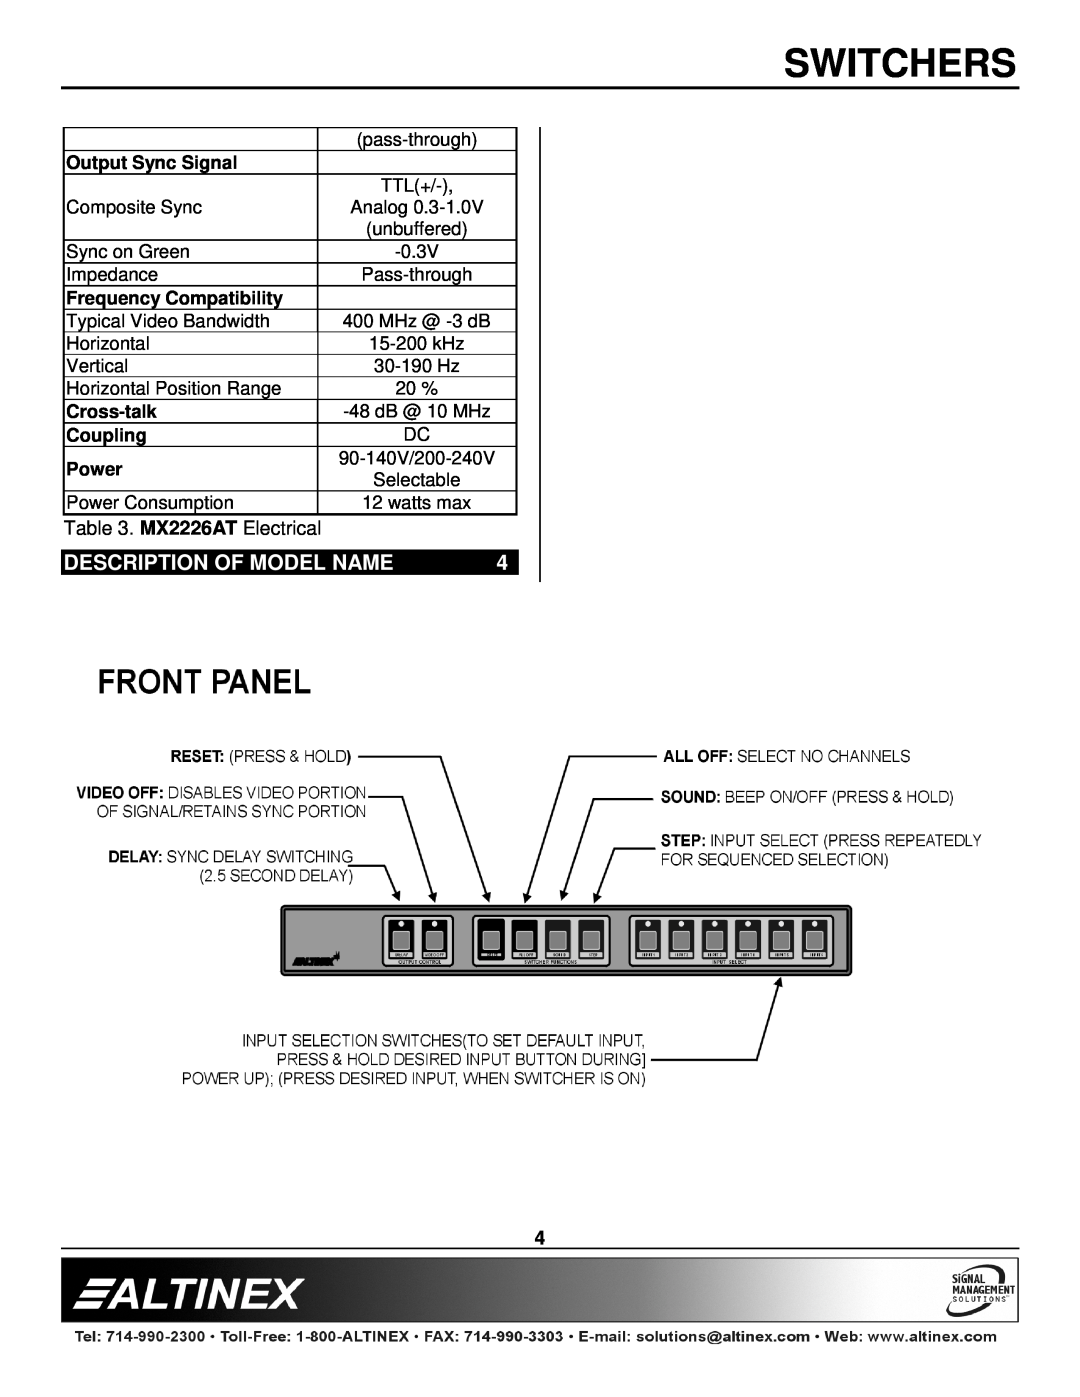 Altinex manual Description Of Model Name, Switchers, MX2226AT Electrical 